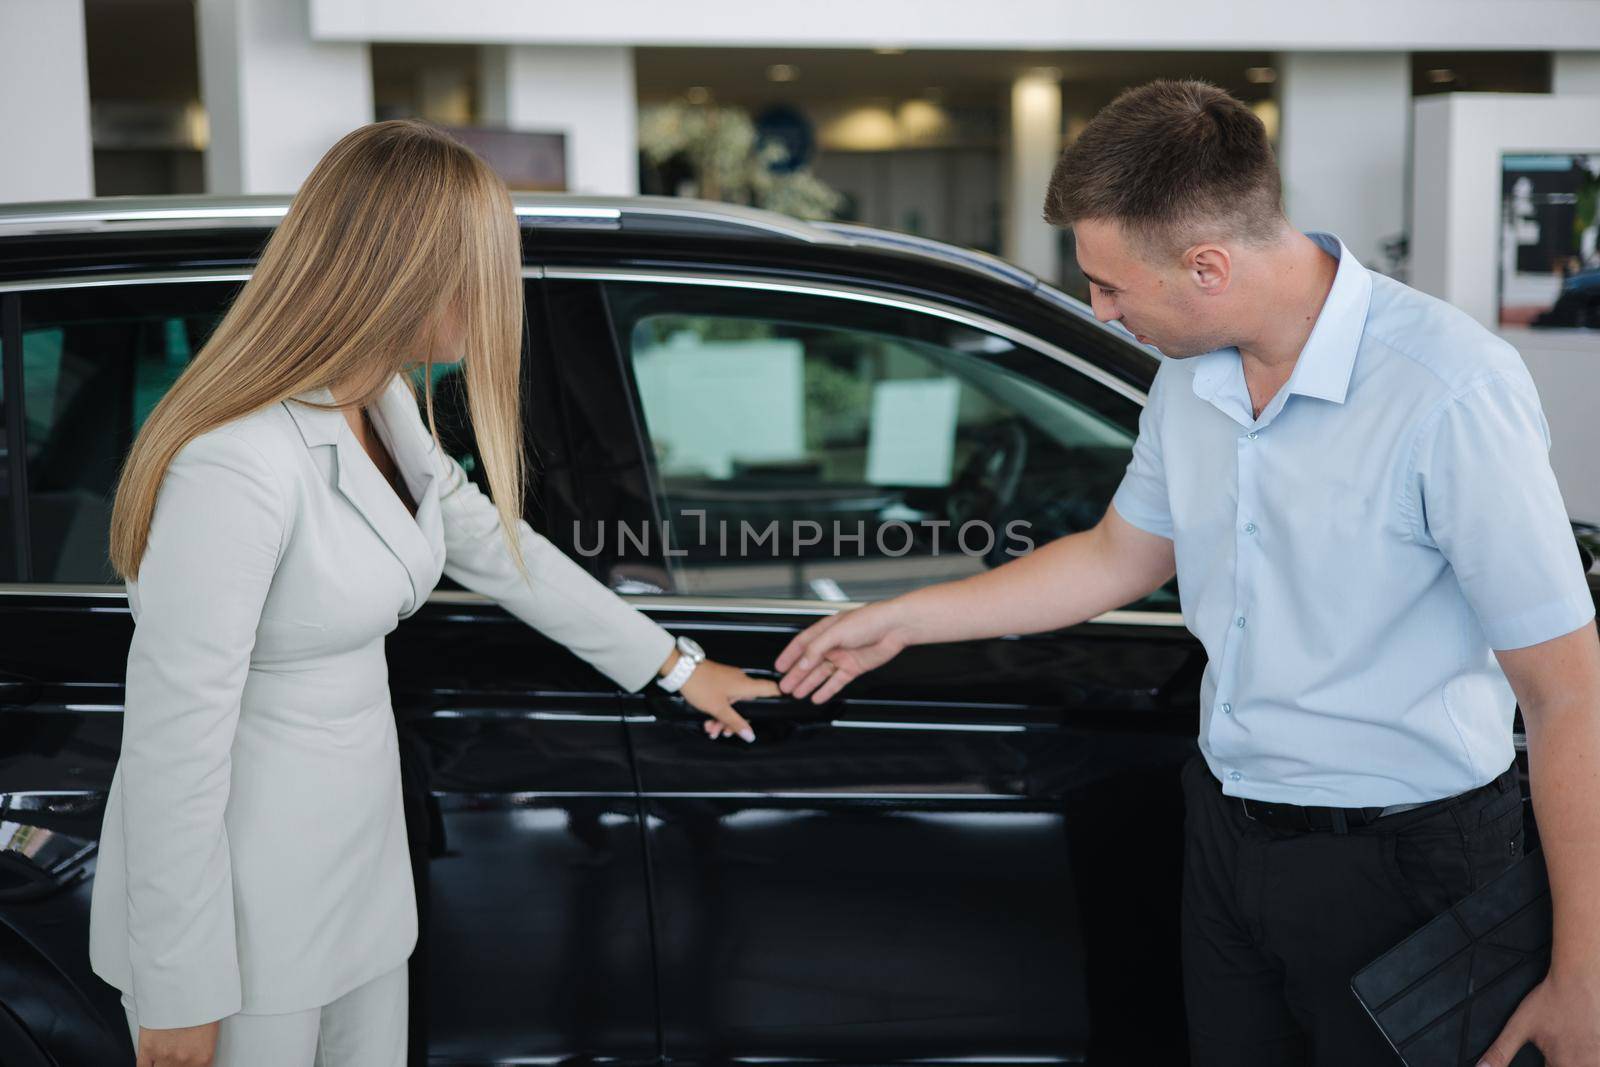 Salesperson shop opporrtunity of each car and help her choos and make right decision. Man and woman in car showroom.